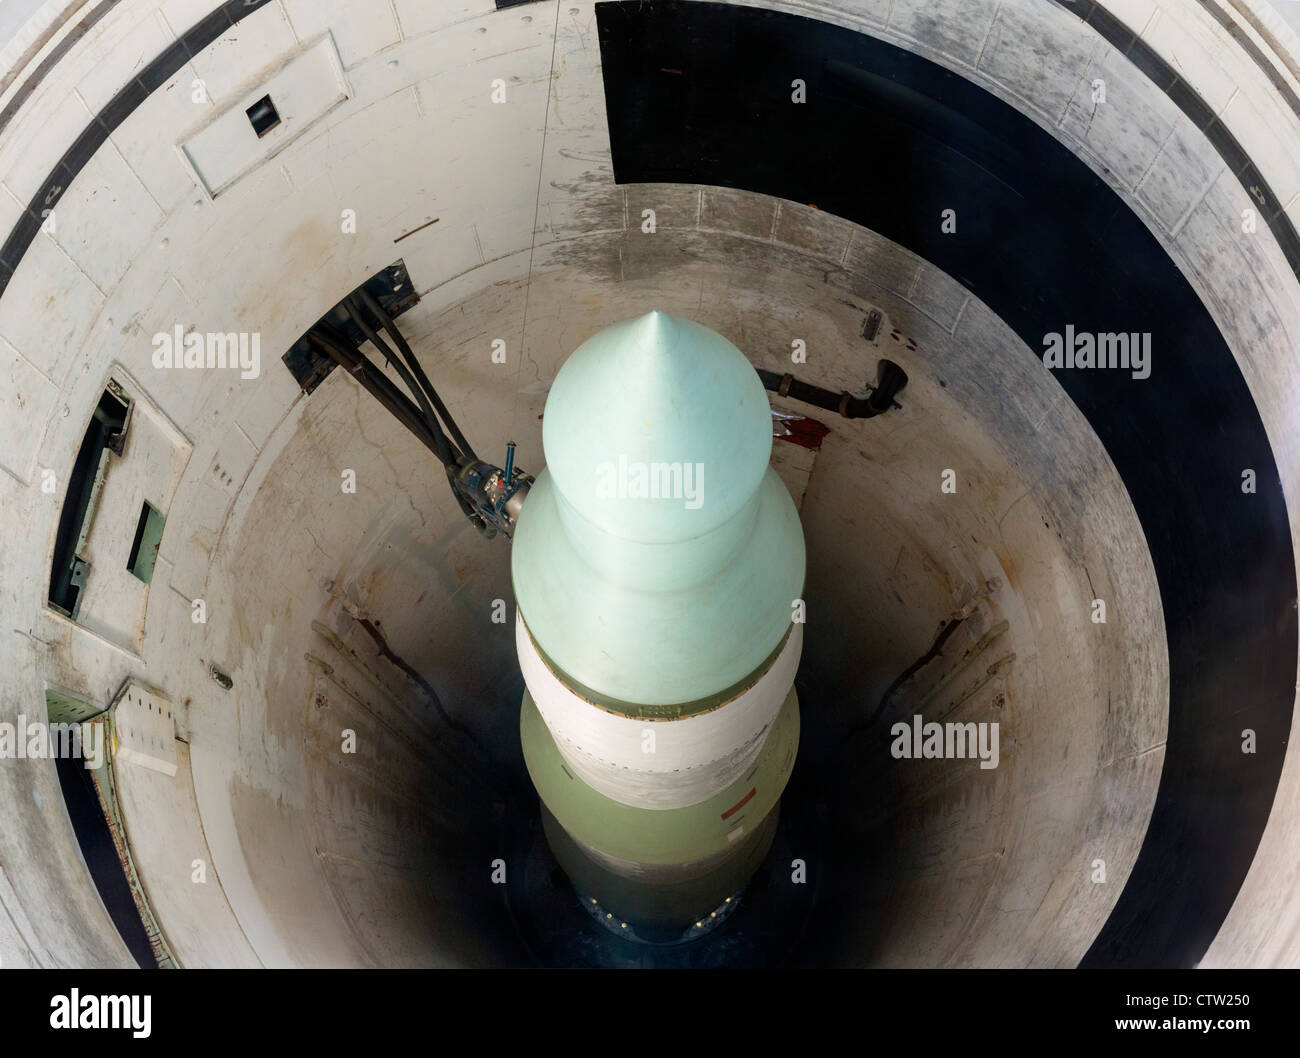 Minuteman II ICBM in missile silo at the Minuteman Missile National Historic Site, near Wall, South Dakota, USA Stock Photo